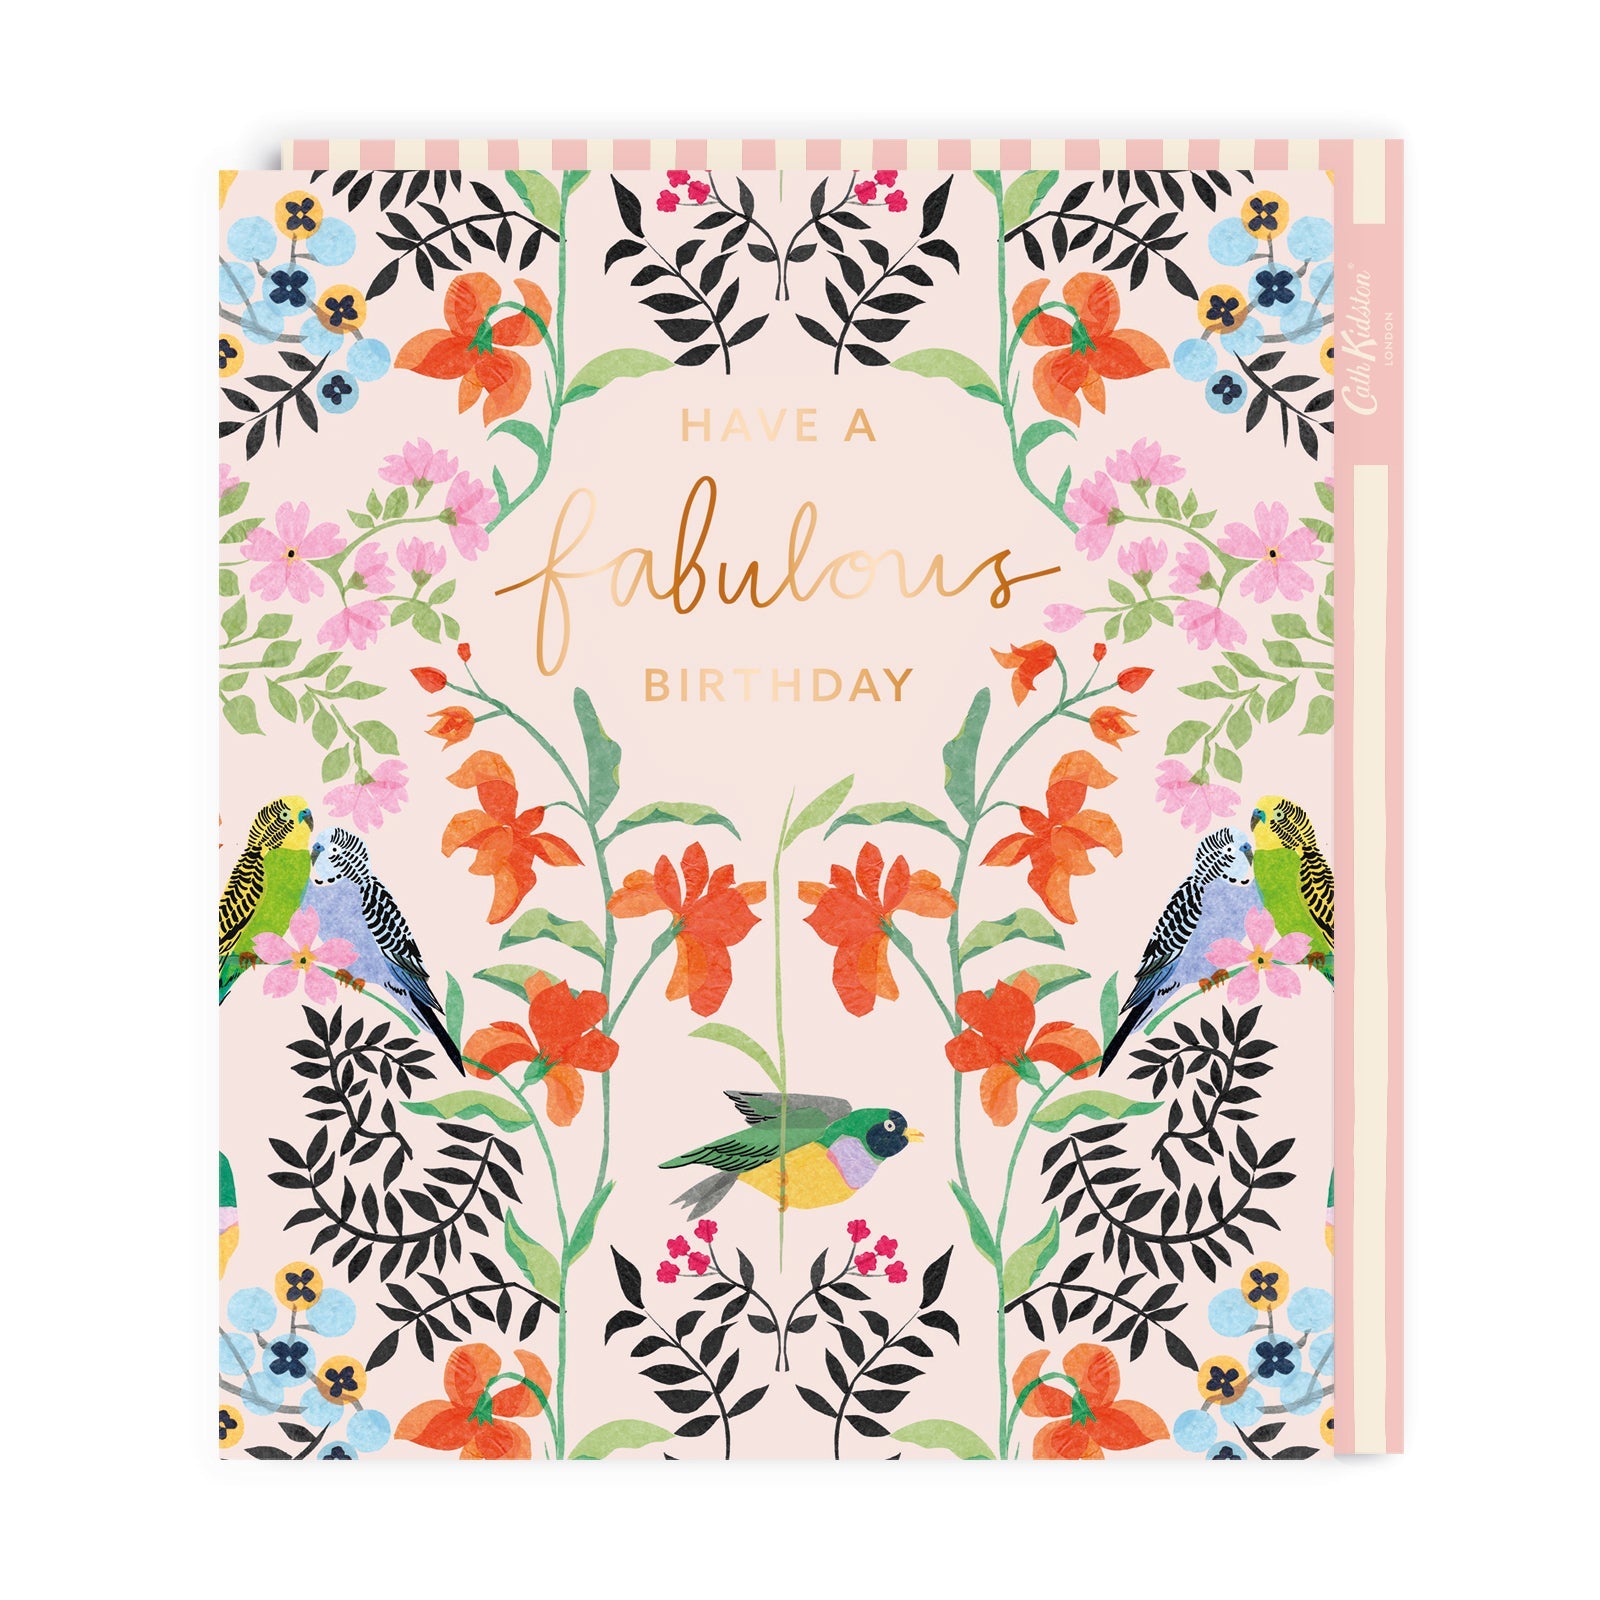 Happy Birthday Card | Perfect Card For Her | Ohh Deer x Cath Kidston | Eco-Friendly Greeting Cards | Fabulous Birthday Birds